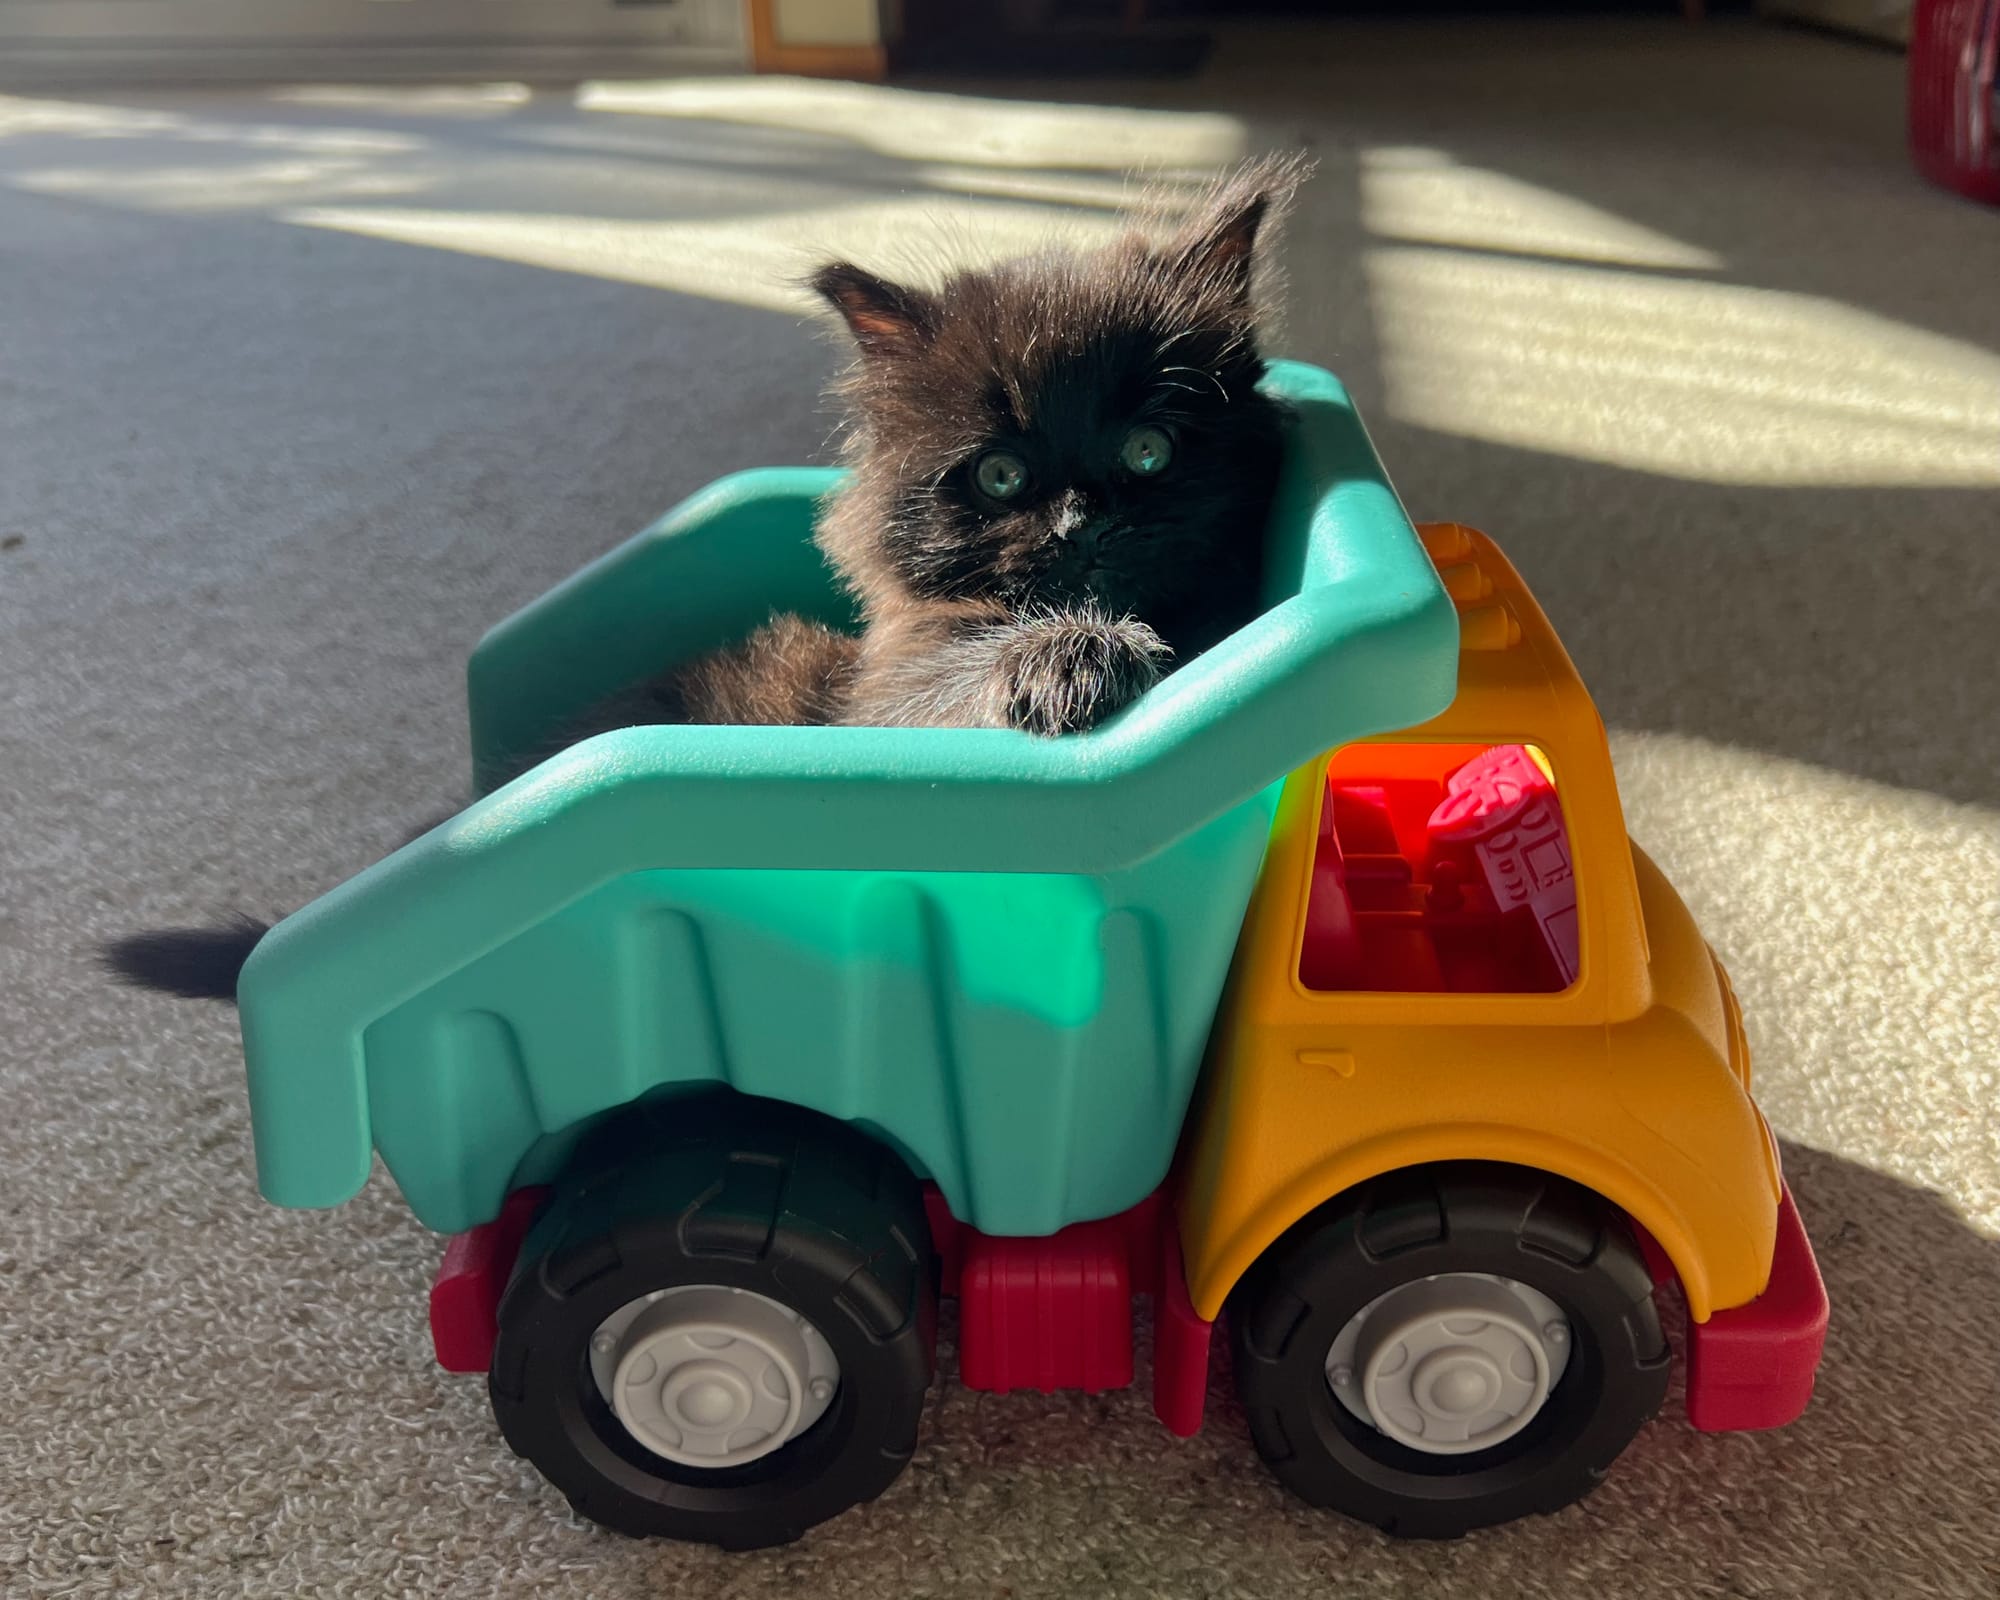 Pango the black rescue kitten playing in a green, red, and orange toy dump truck